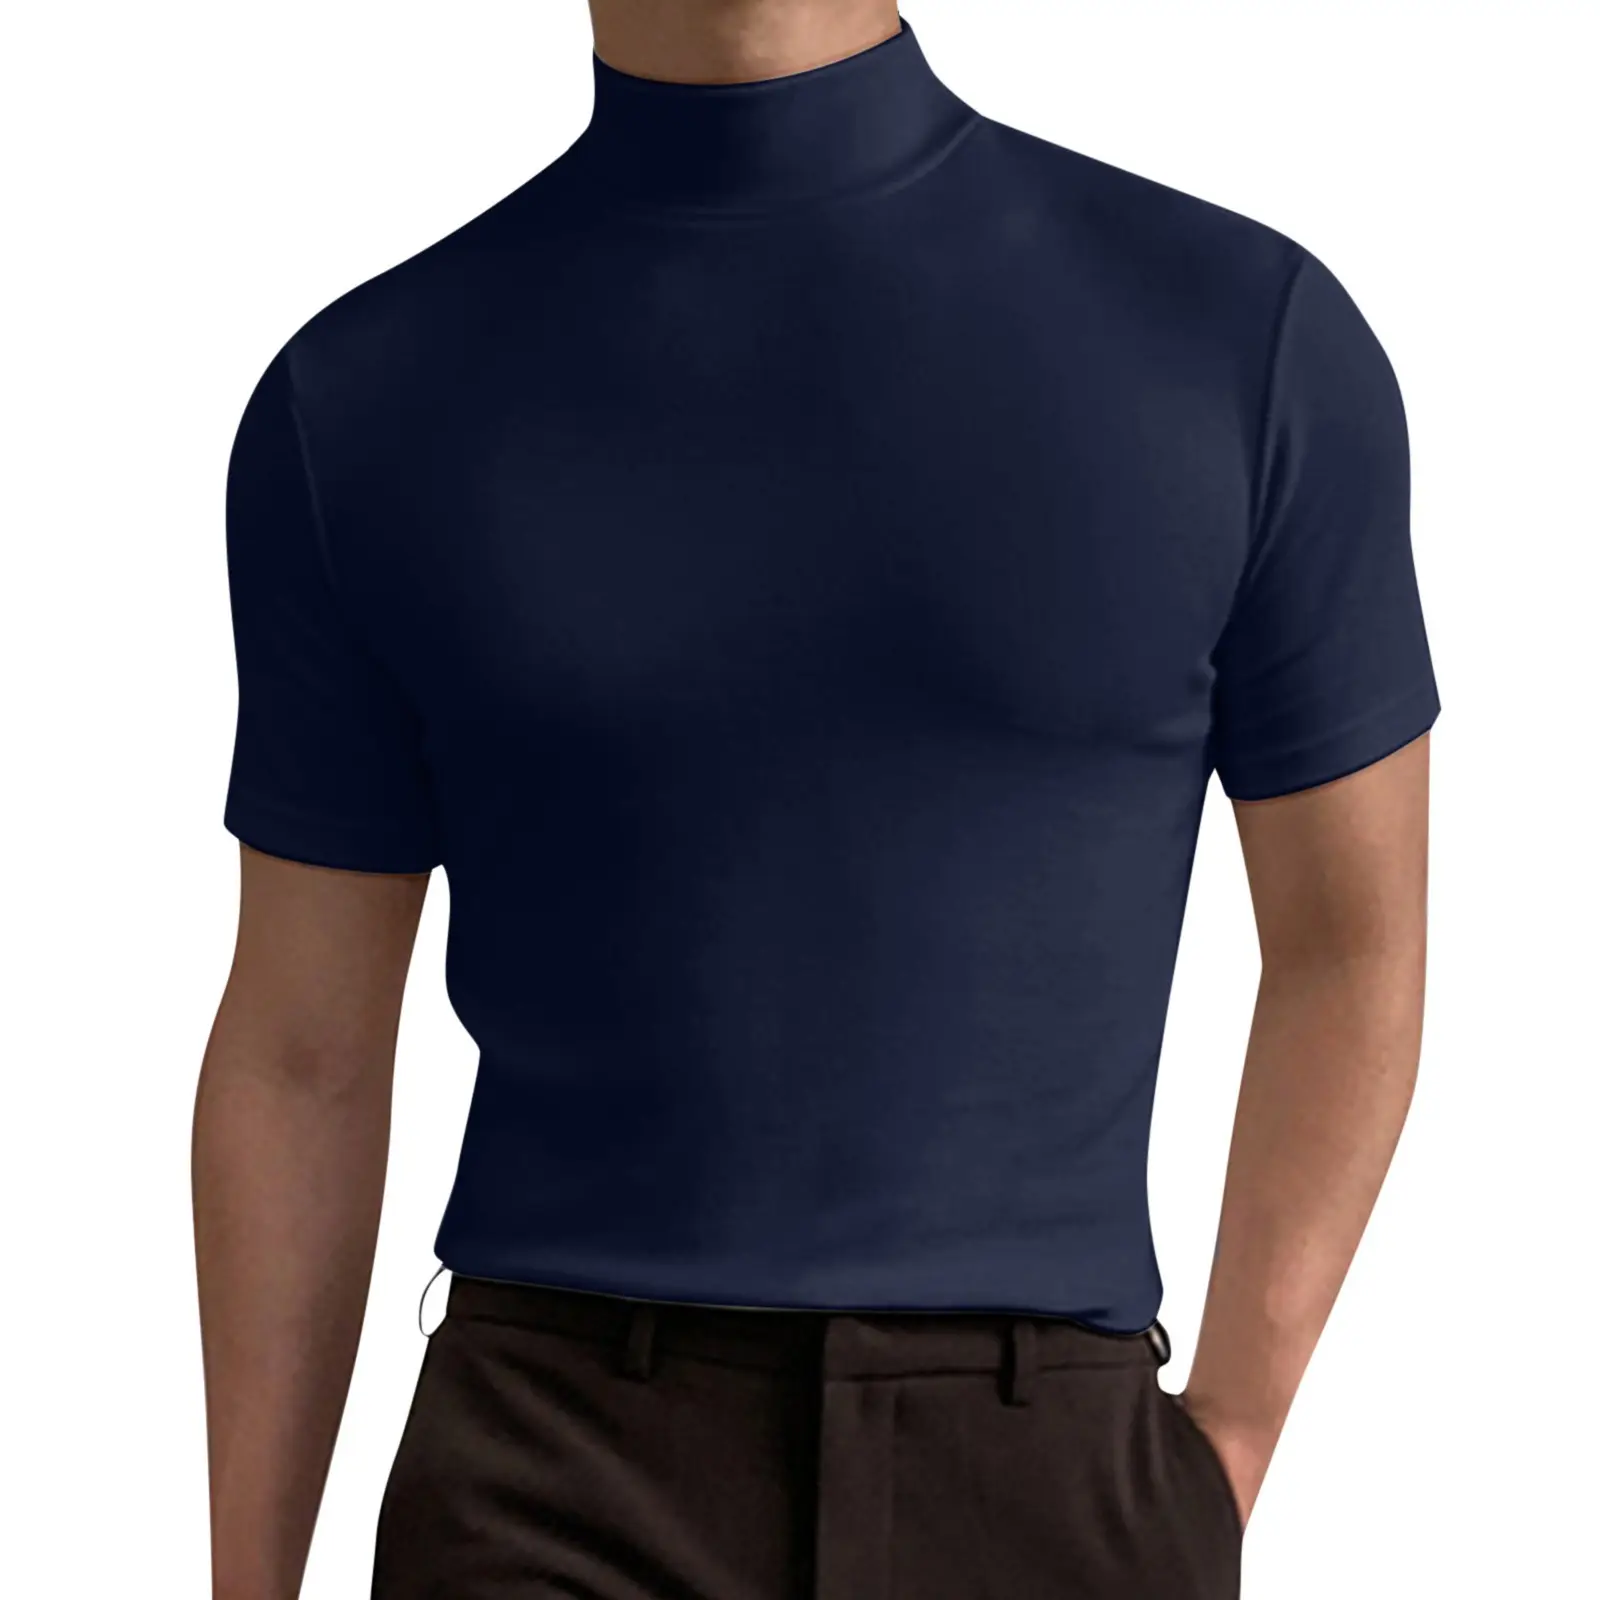 Men's autumn and winter high neck long sleeved t shirt men solid color top